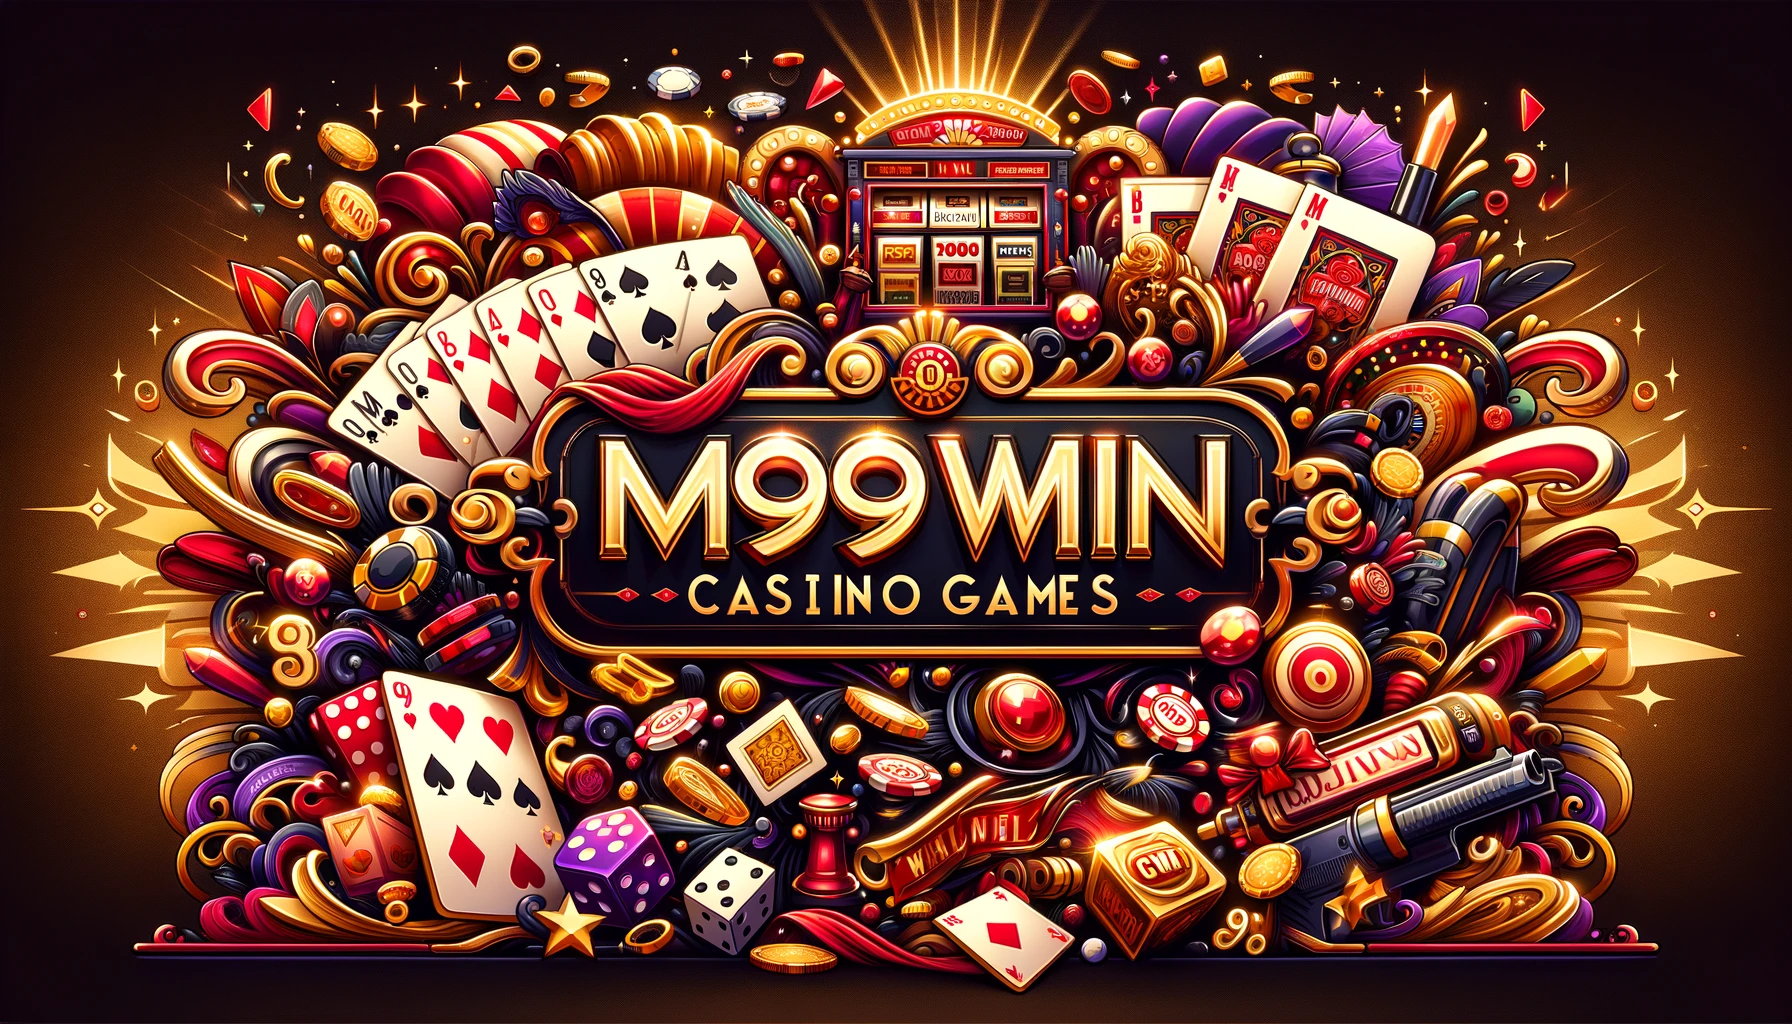 How to Win More Money by Playing at M99win Casino